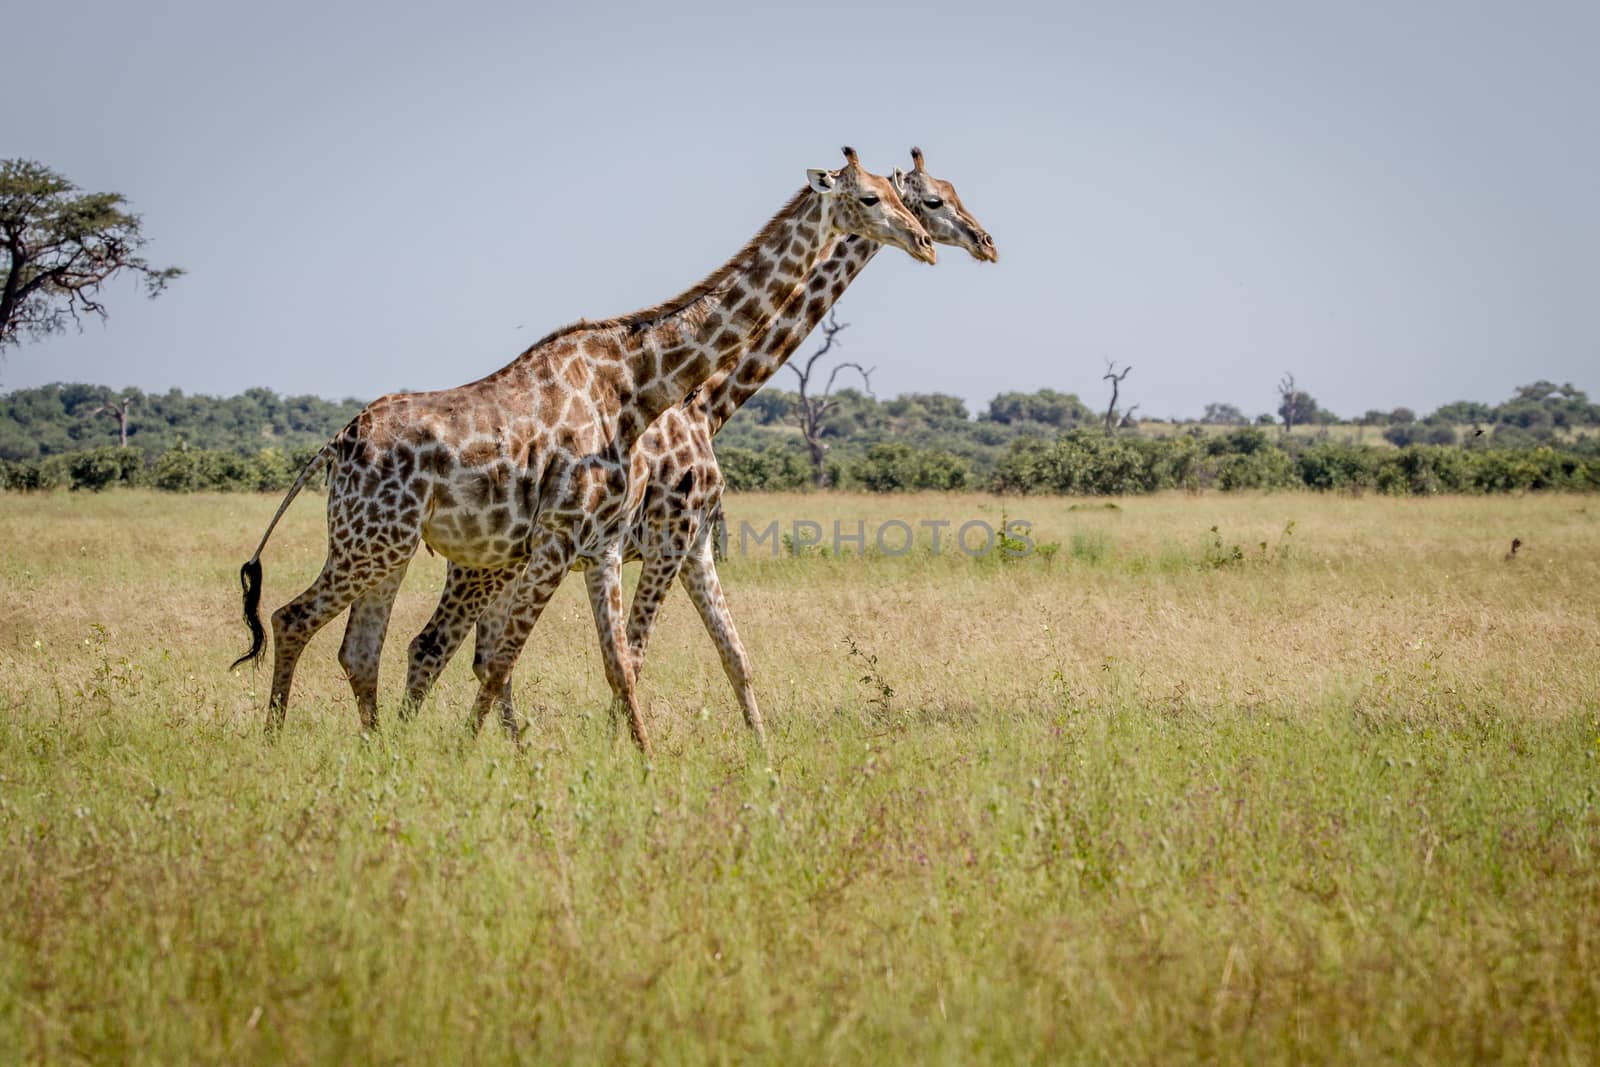 Two Giraffes walking in the grass. by Simoneemanphotography